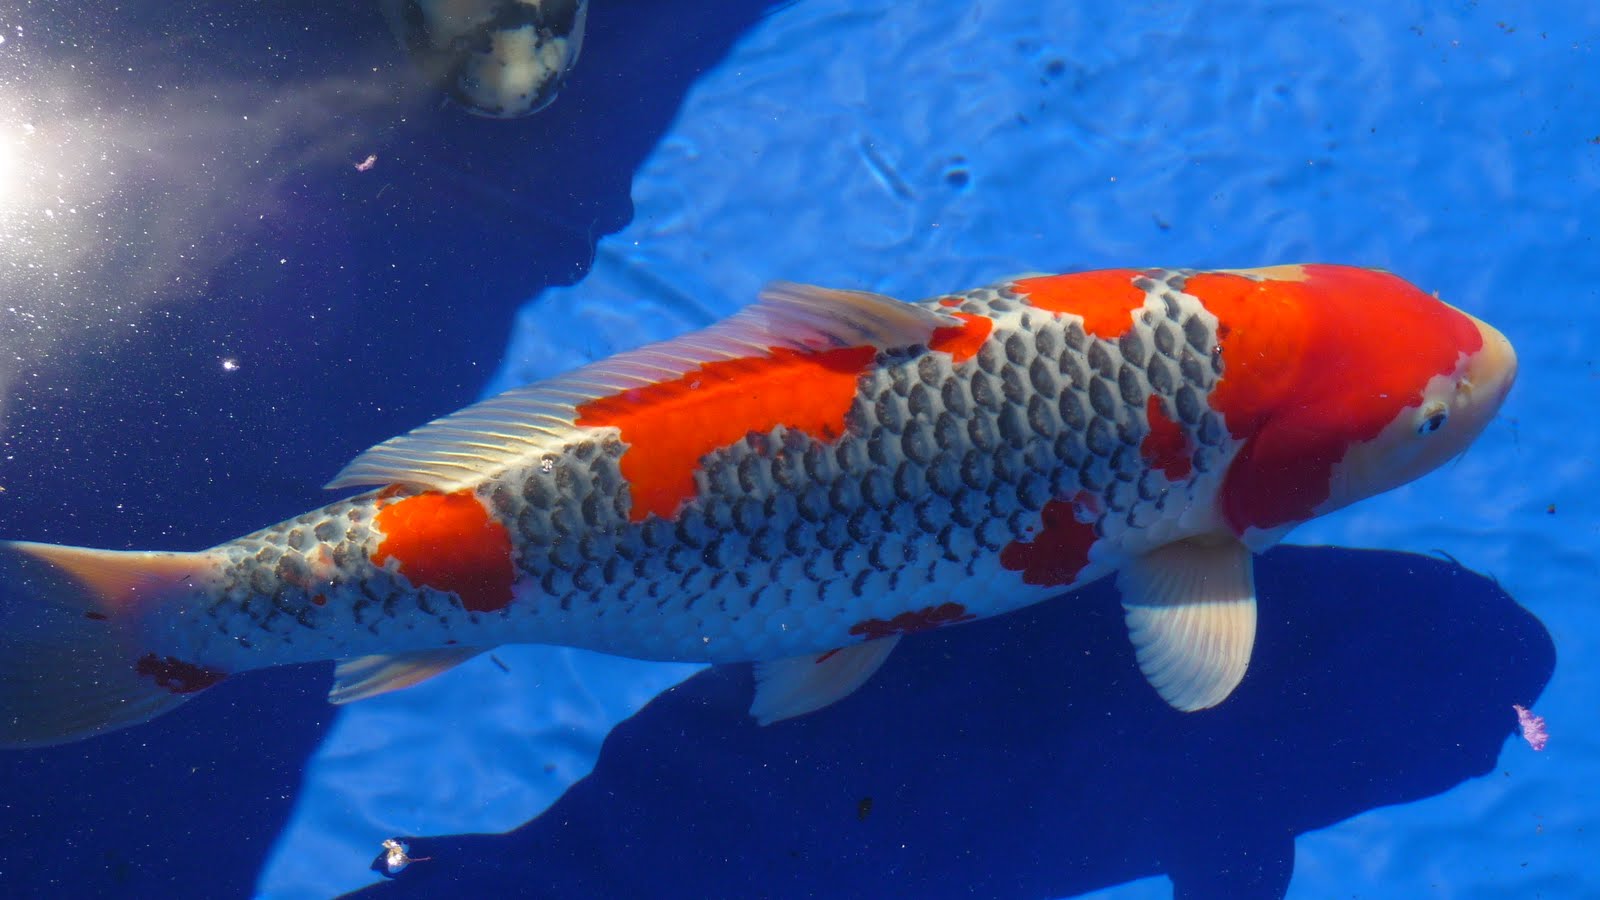 Free Download Koi Fish Wallpapers For Desktop 1600x900 For Your Images, Photos, Reviews